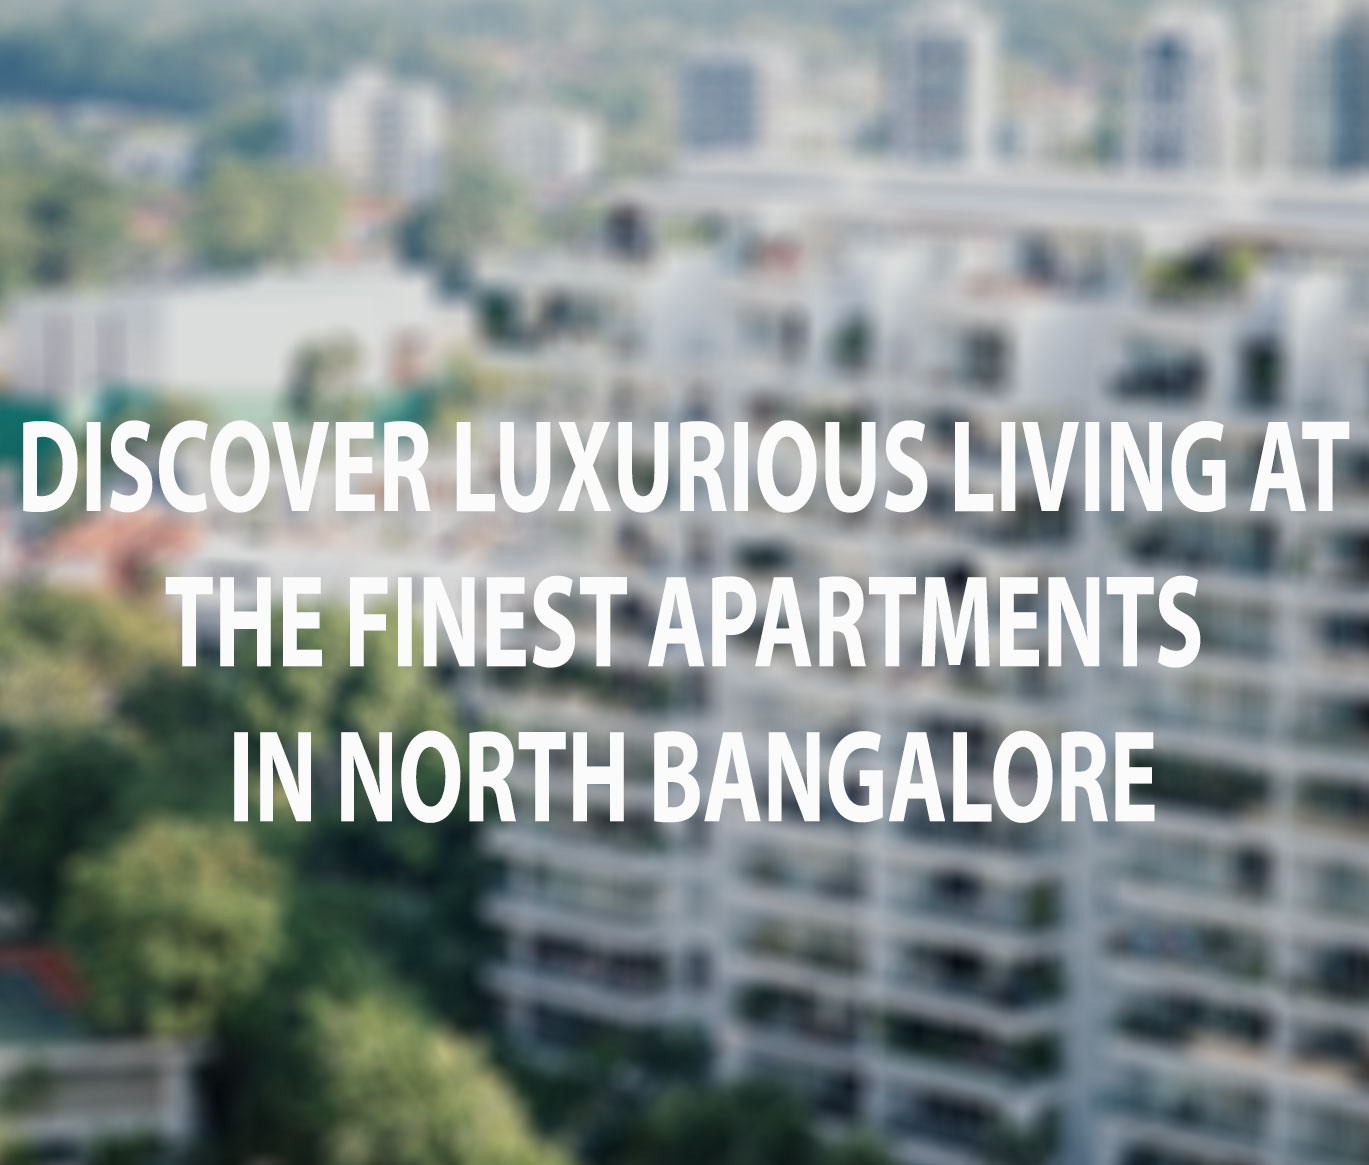 Discover Luxurious Living at the Finest Apartments in North Bangalore